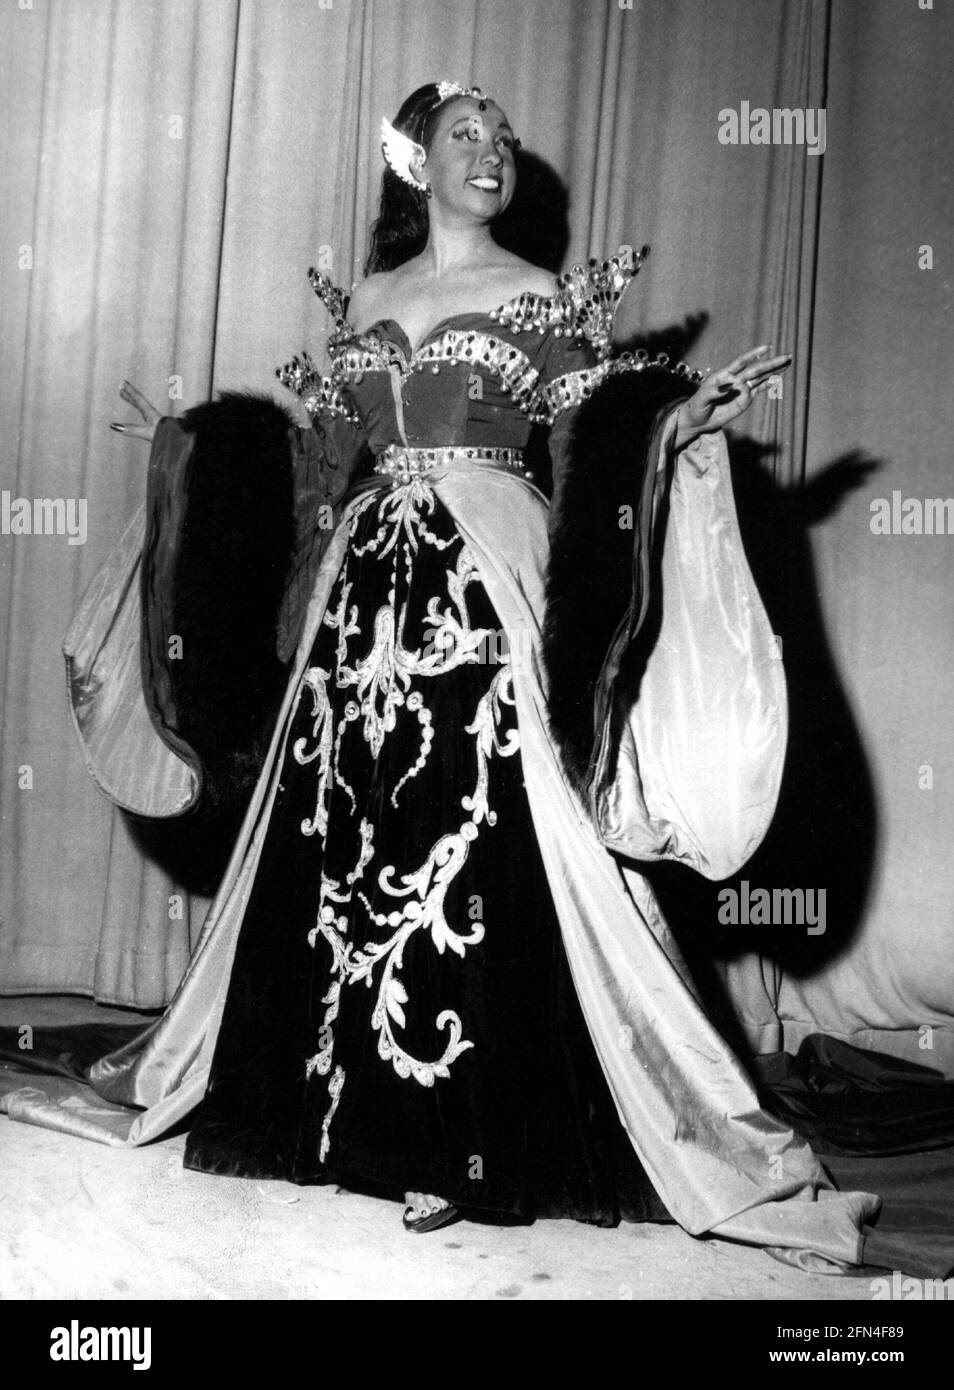 Baker, Josephine, 3.6.1906 - 12.4.1975, American dancer, full length, on stage, 1950s, ADDITIONAL-RIGHTS-CLEARANCE-INFO-NOT-AVAILABLE Stock Photo